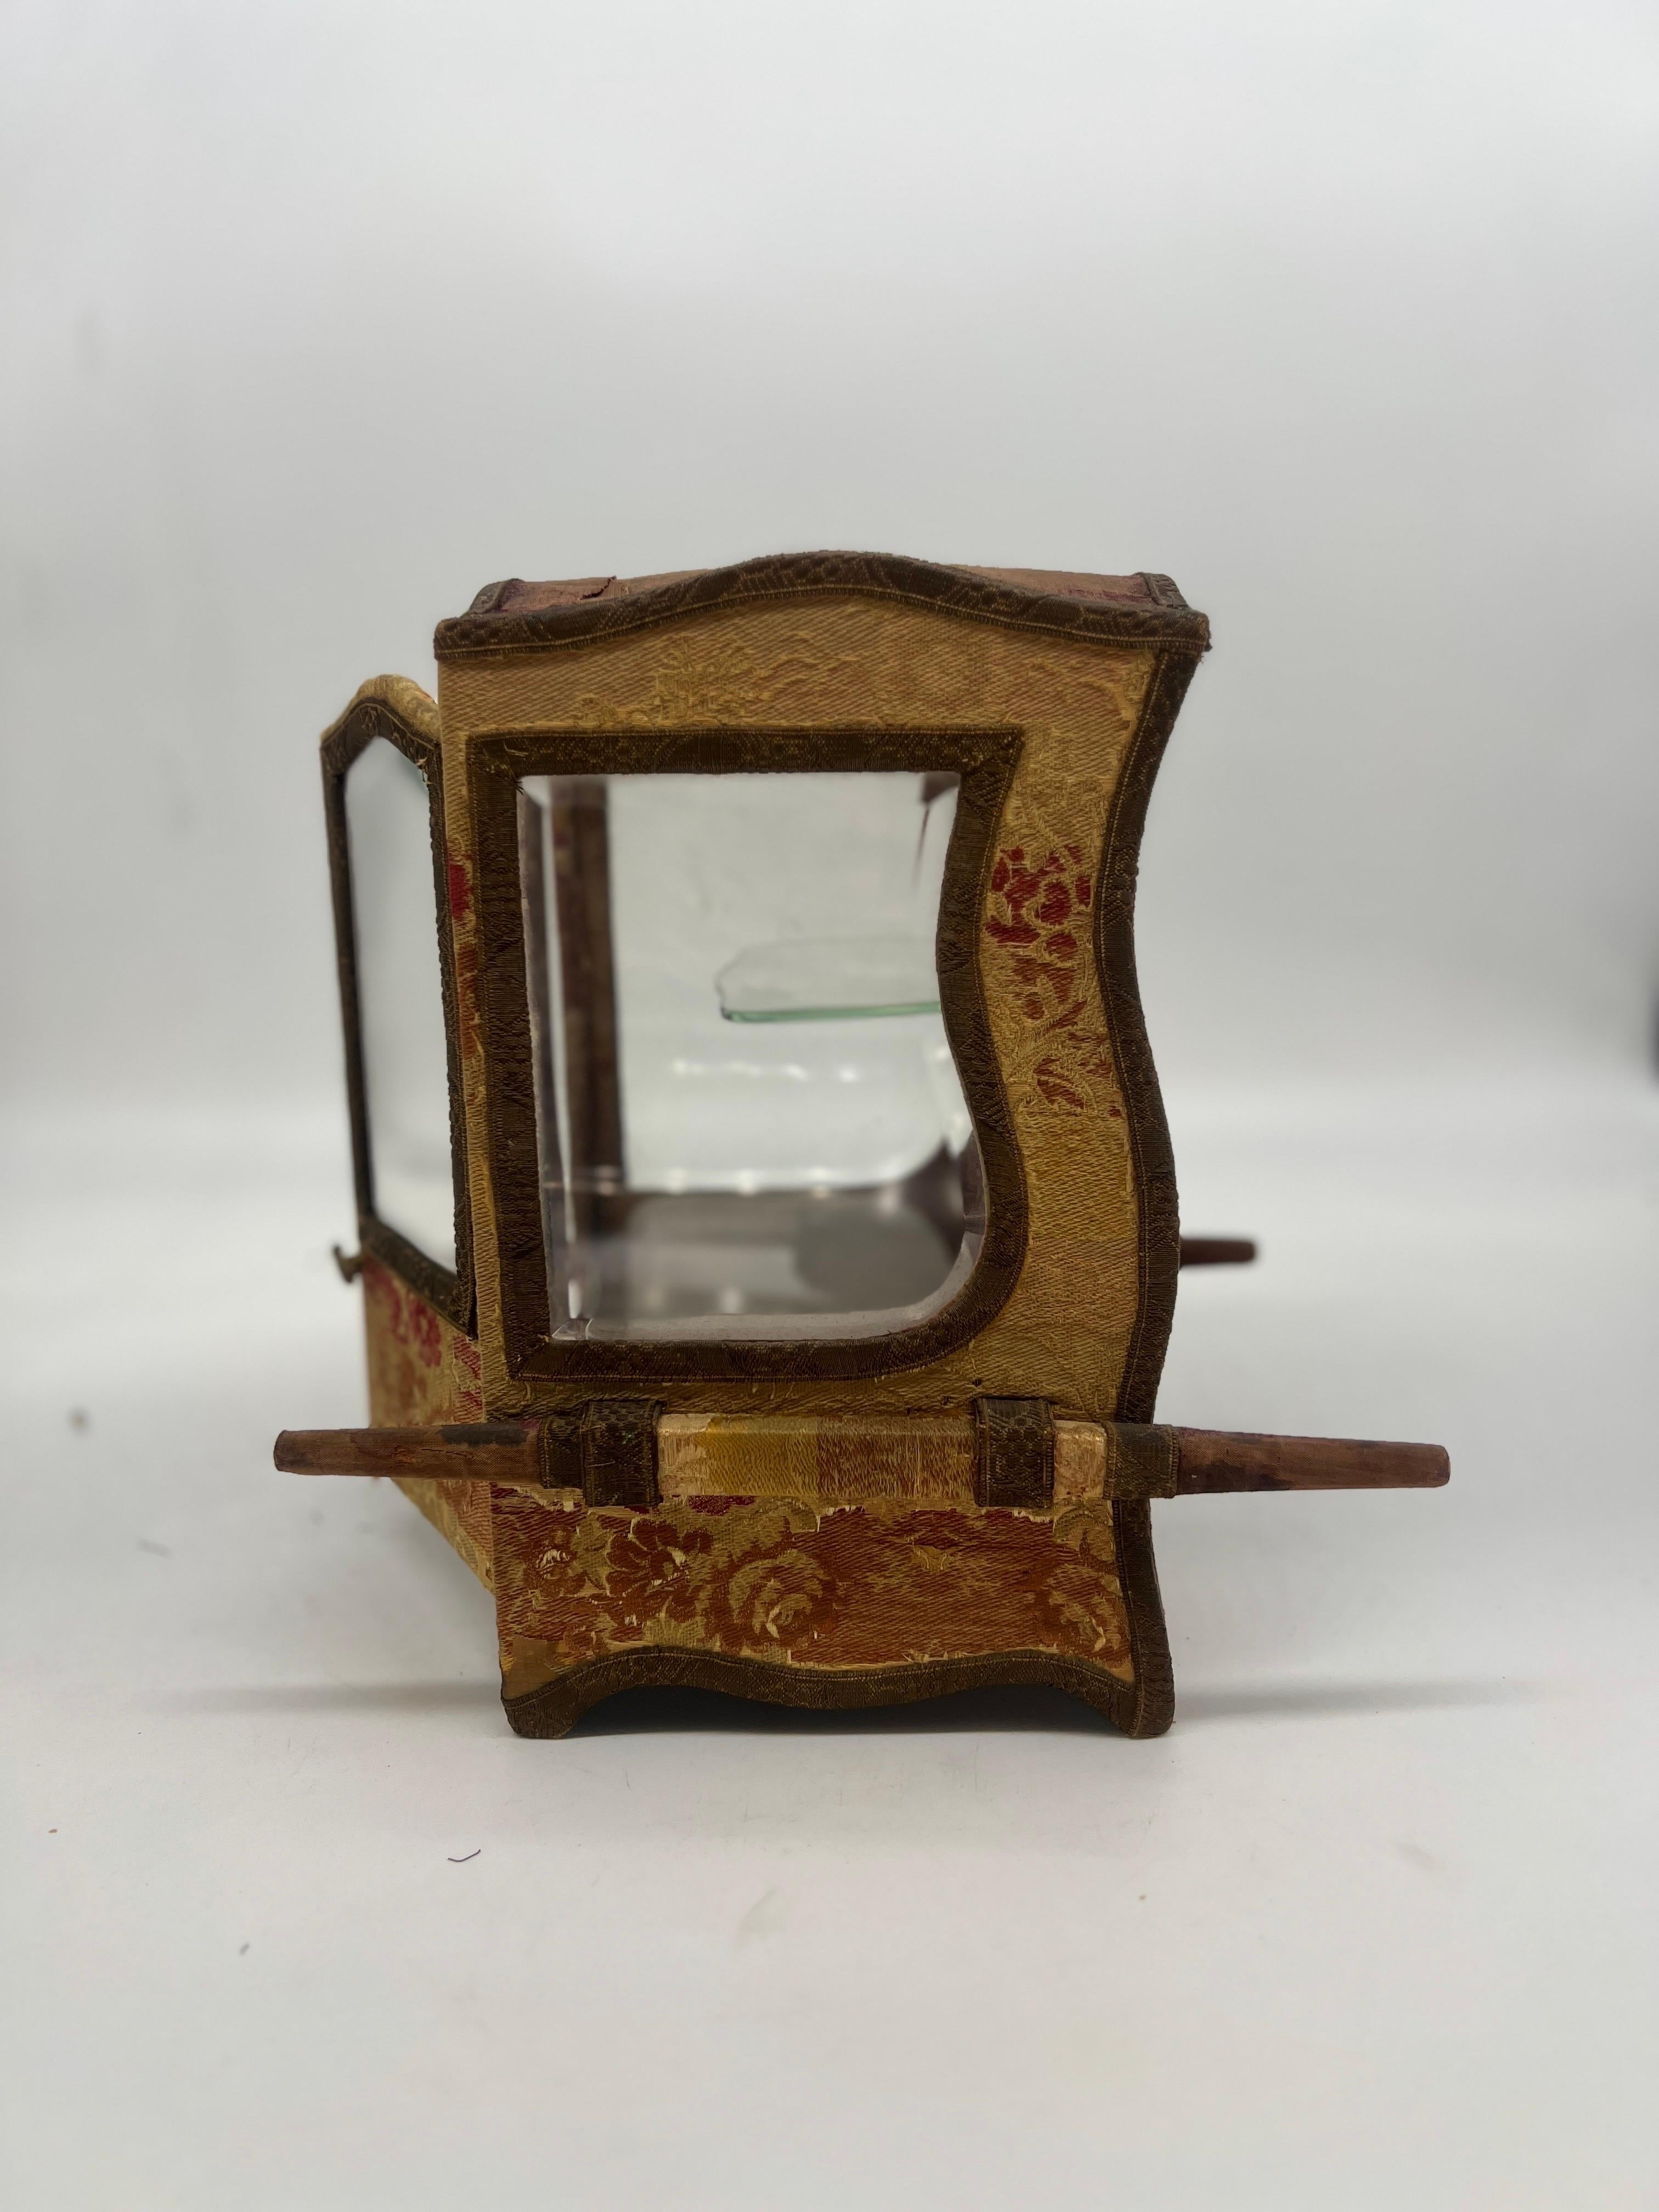 French Provincial 19th Century French Table Top Sedan Chair Vitrine Cabinet For Sale